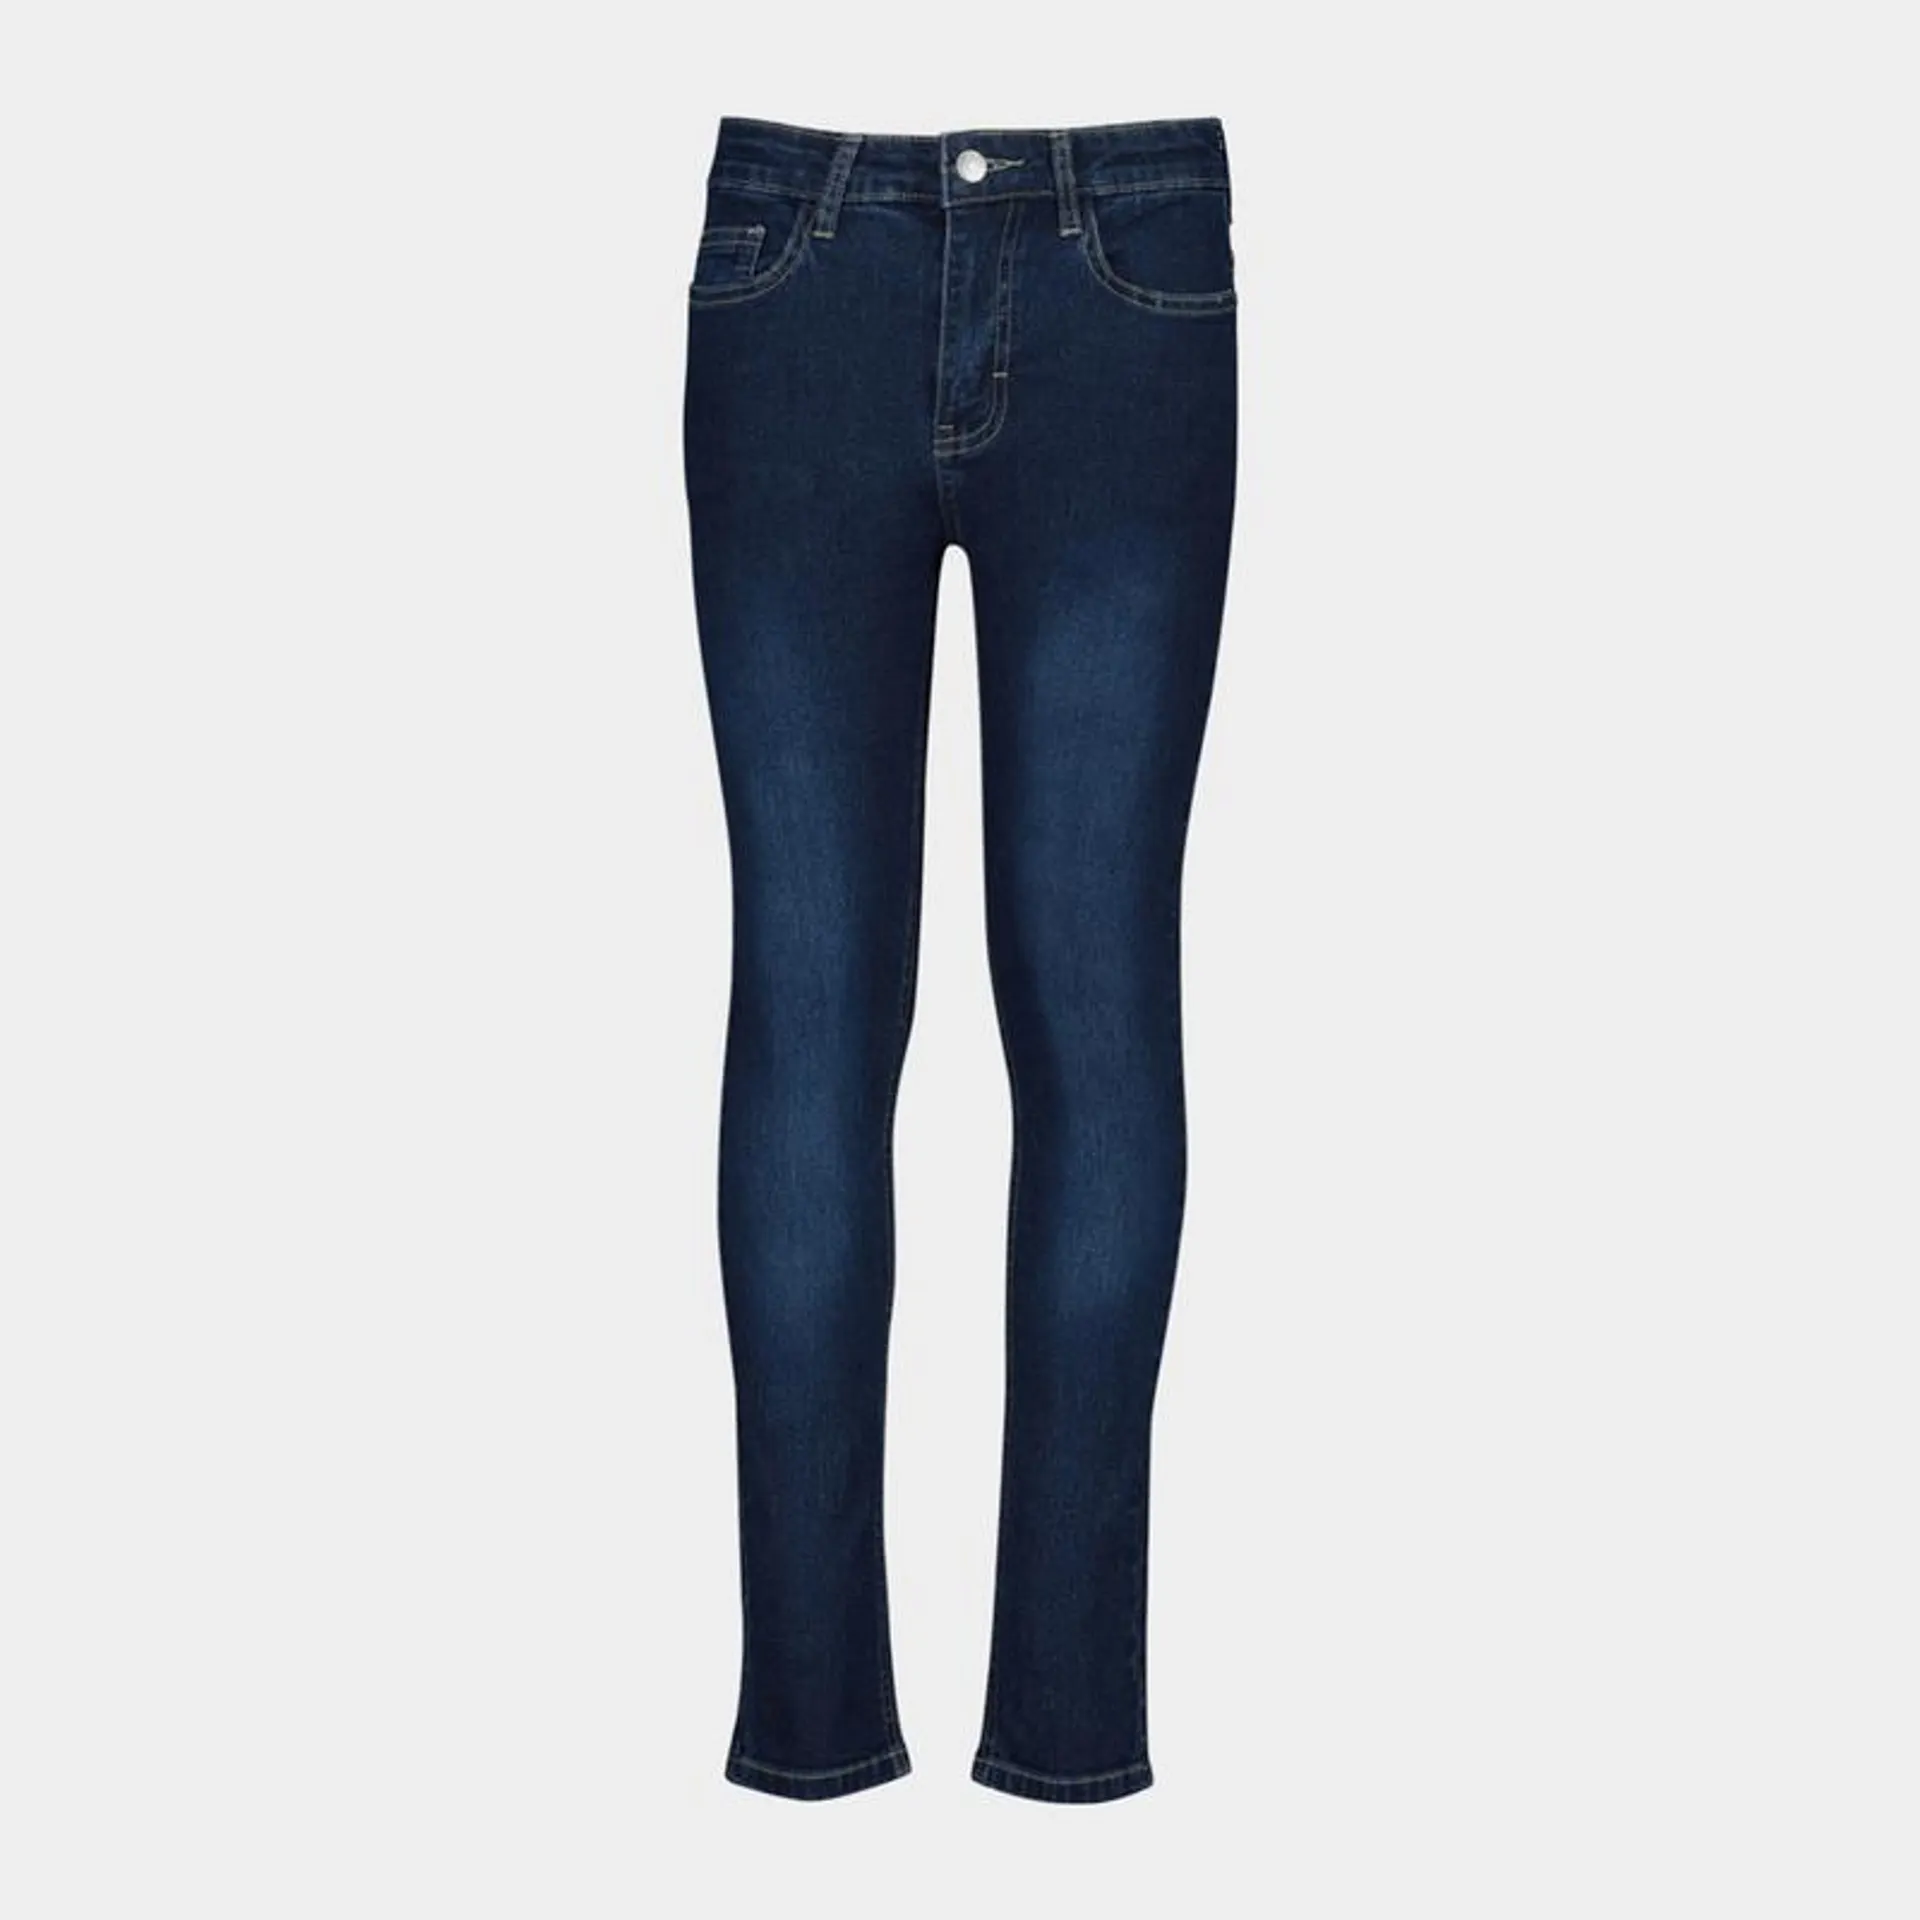 Younger Boy's Dark Blue Skinny Jeans